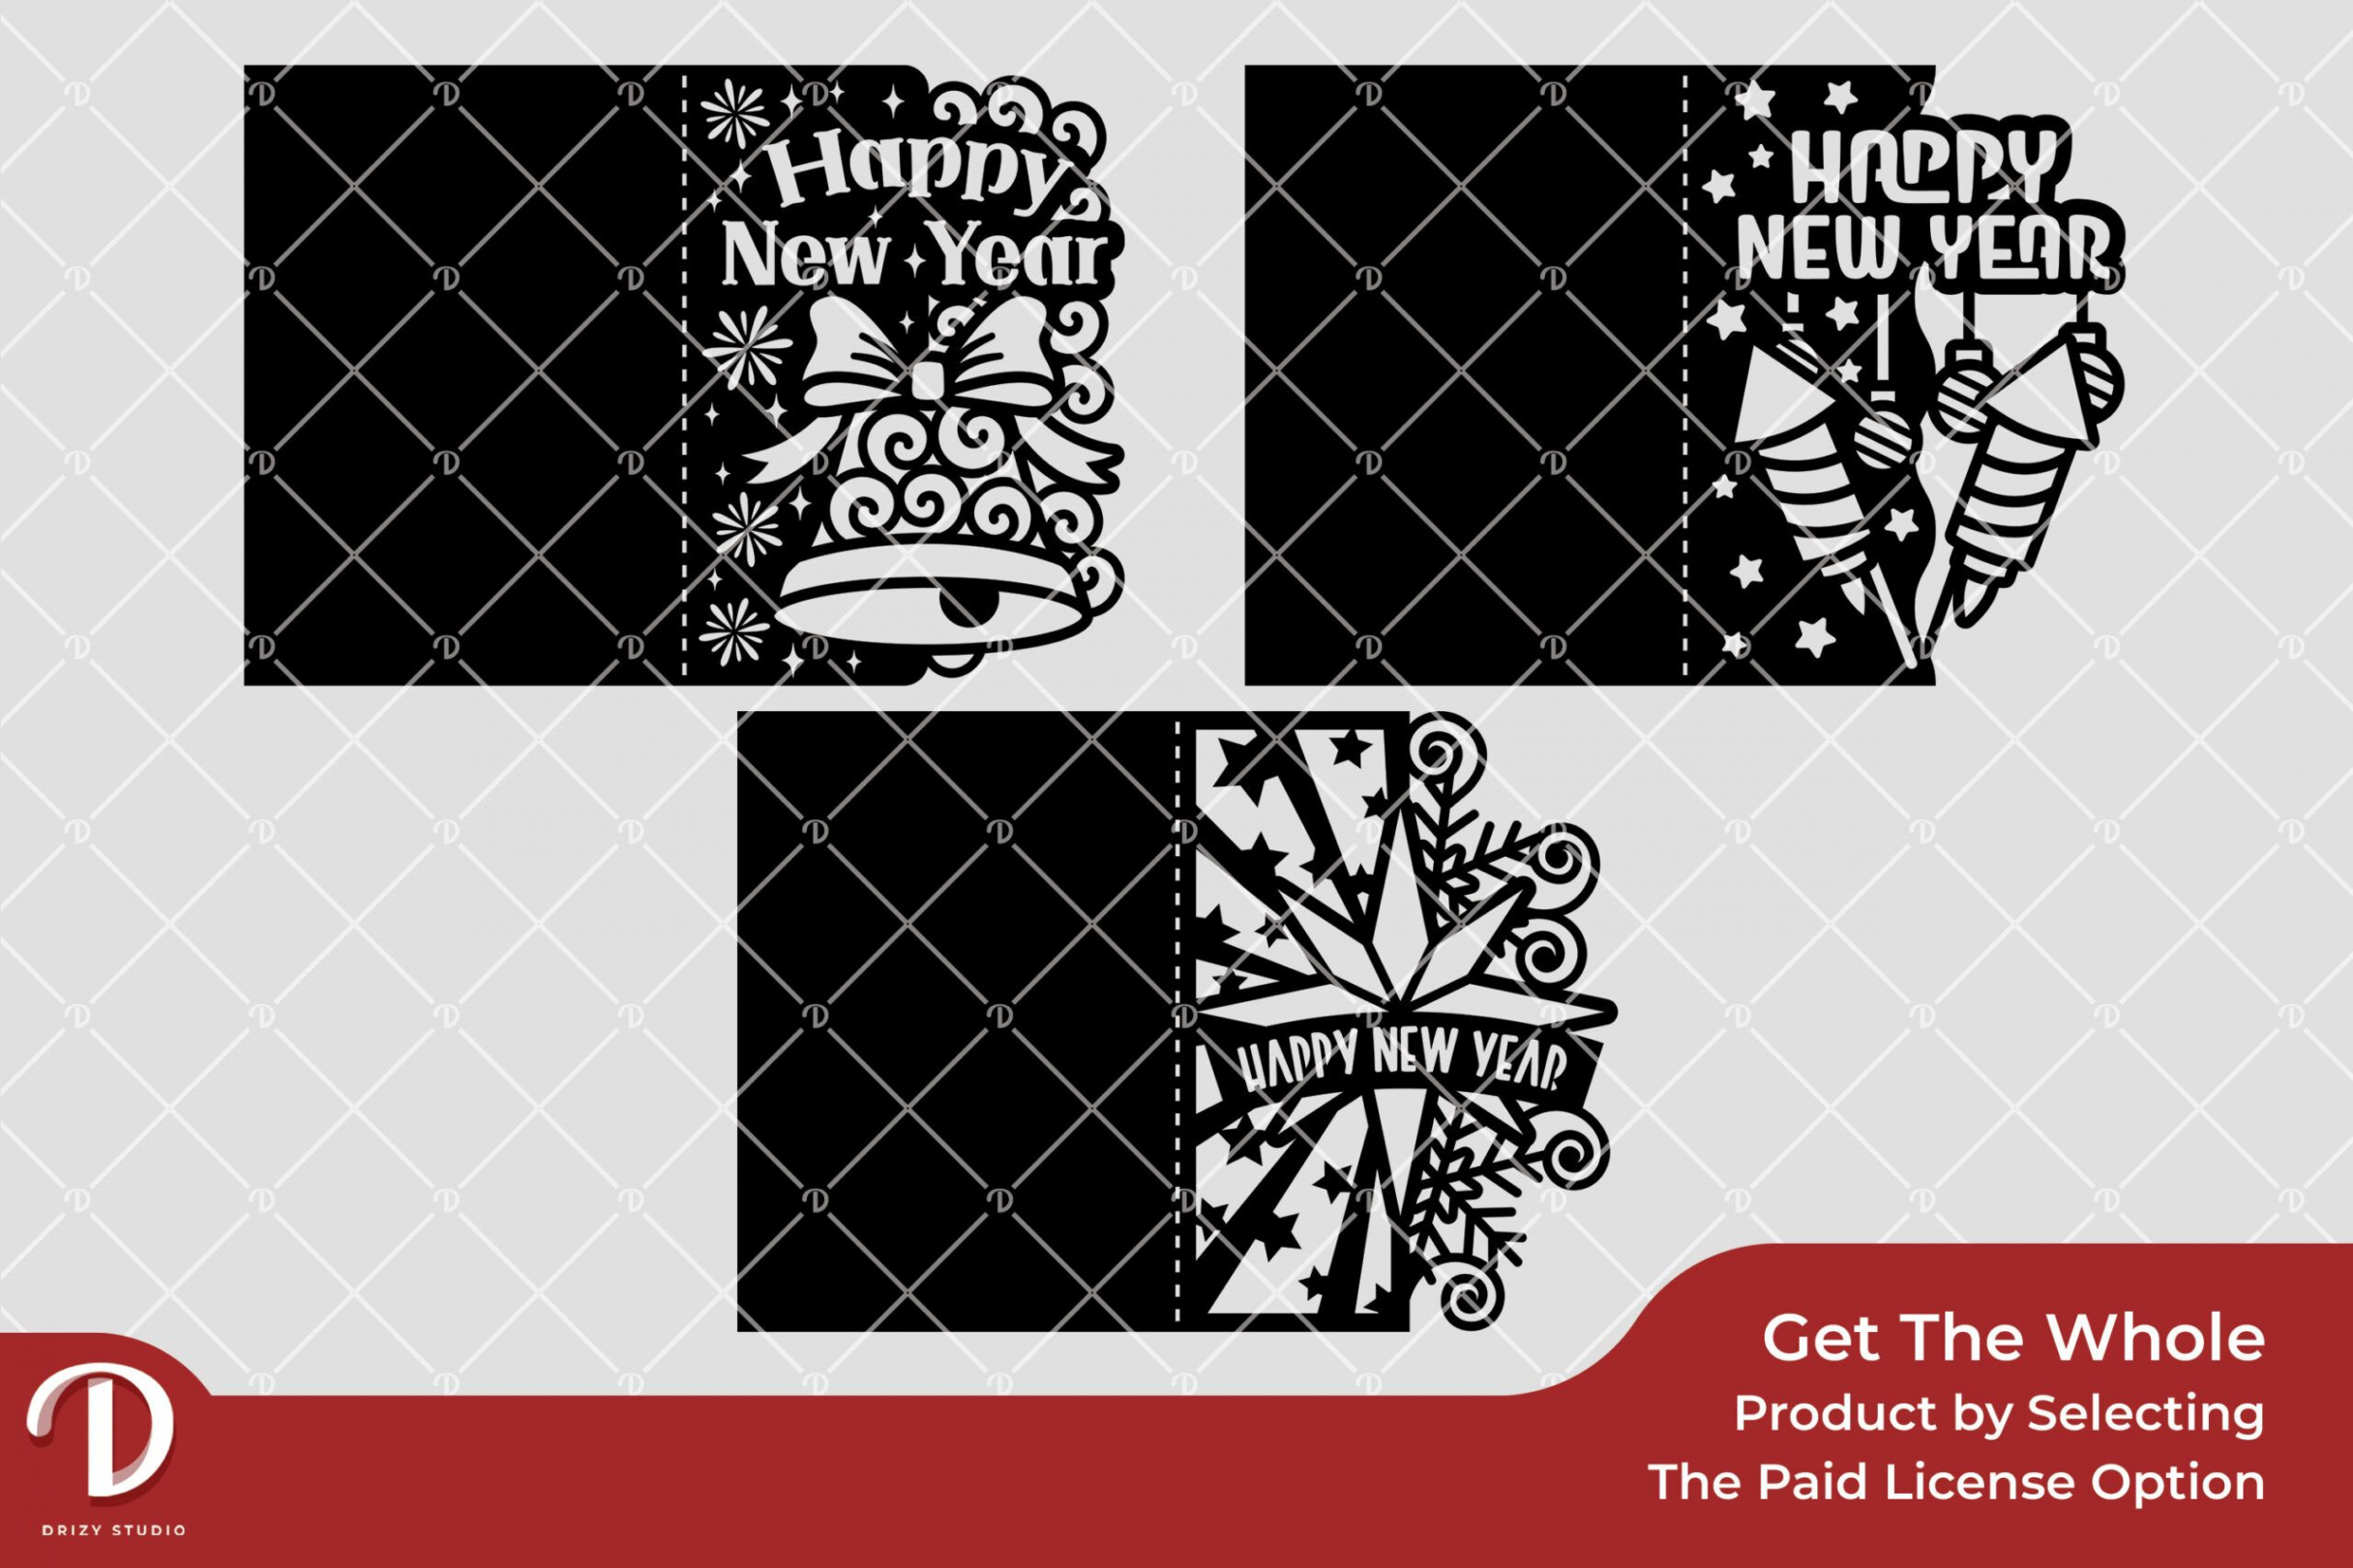 Happy New Year Greeting Card SVG -  Variations - Drizy Studio